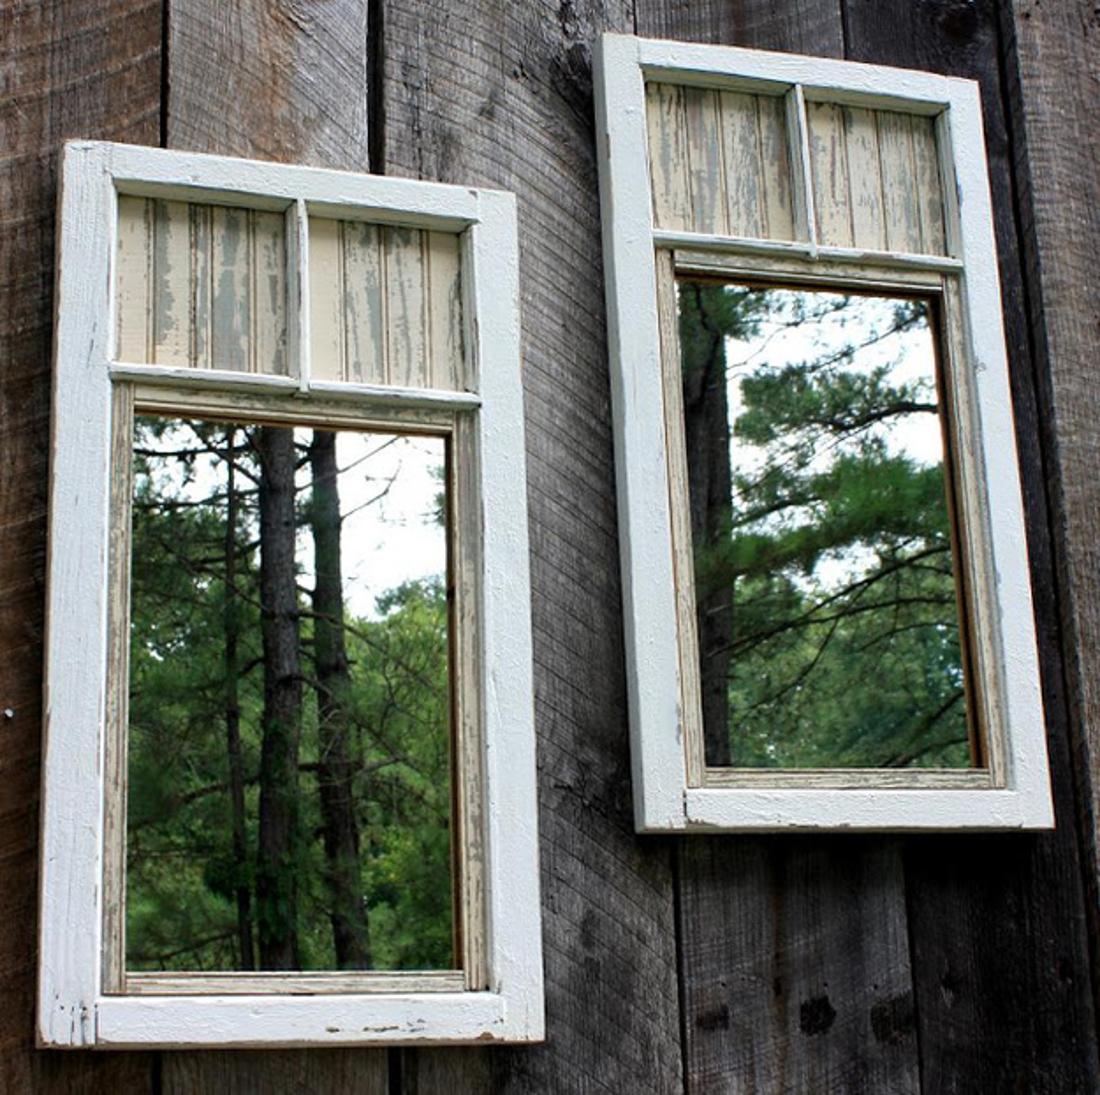 Put mirrors on your fence to make the yard look more prominent.